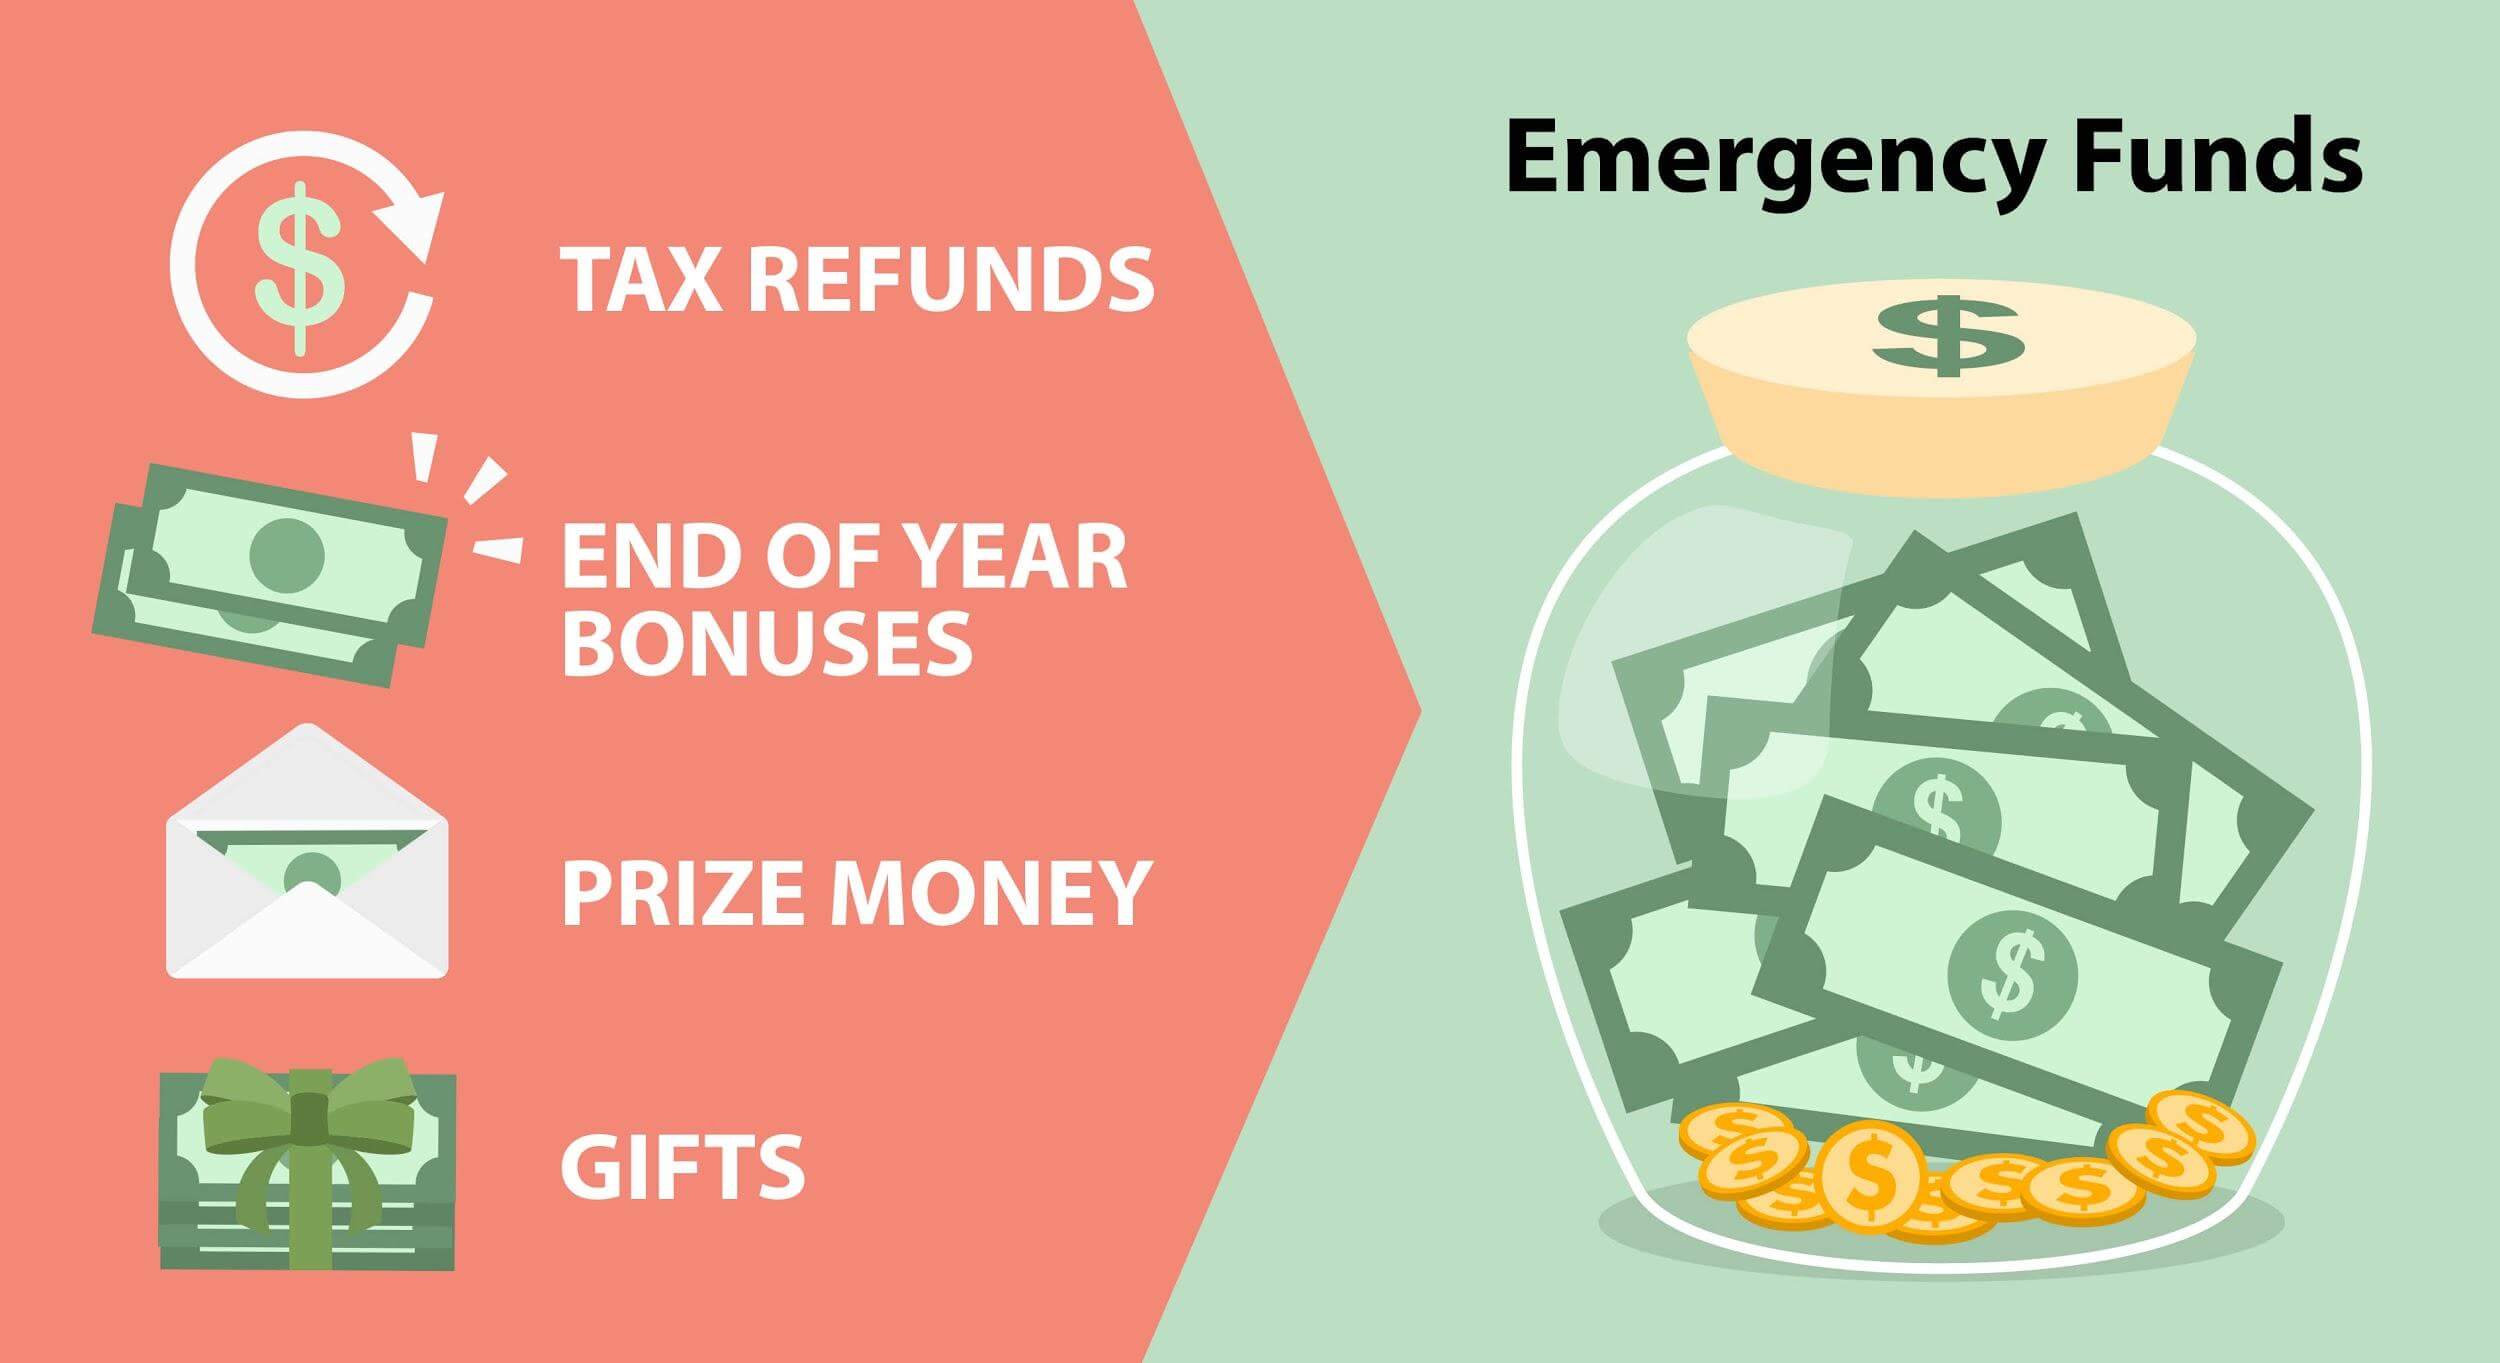 You don’t need an emergency fund